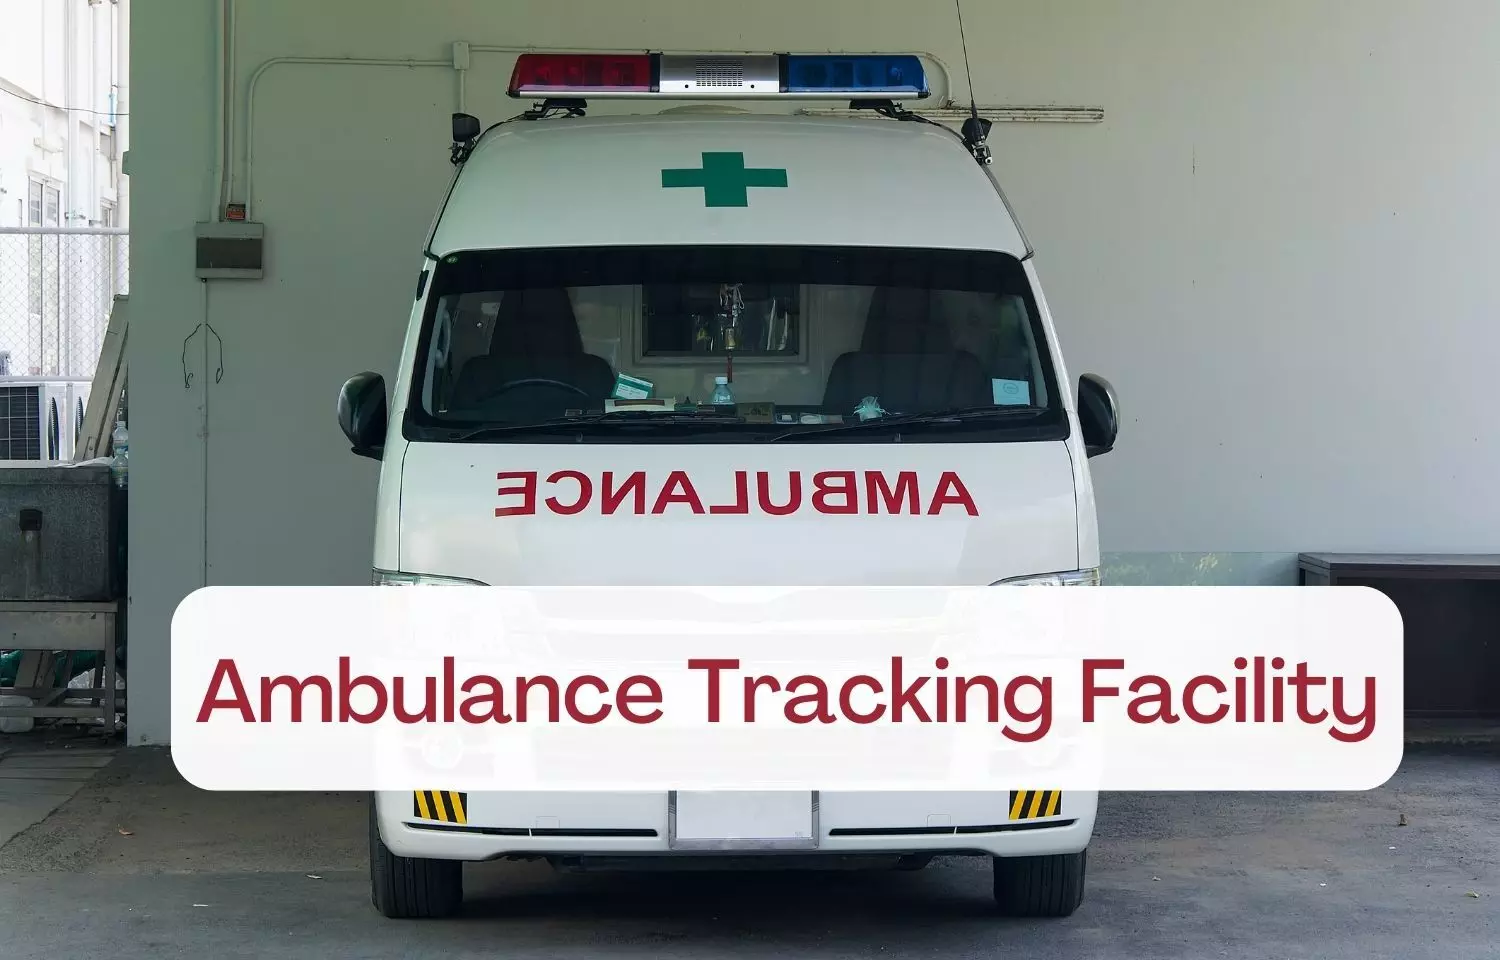 Gleneagles Global Health City launches ambulance tracking application